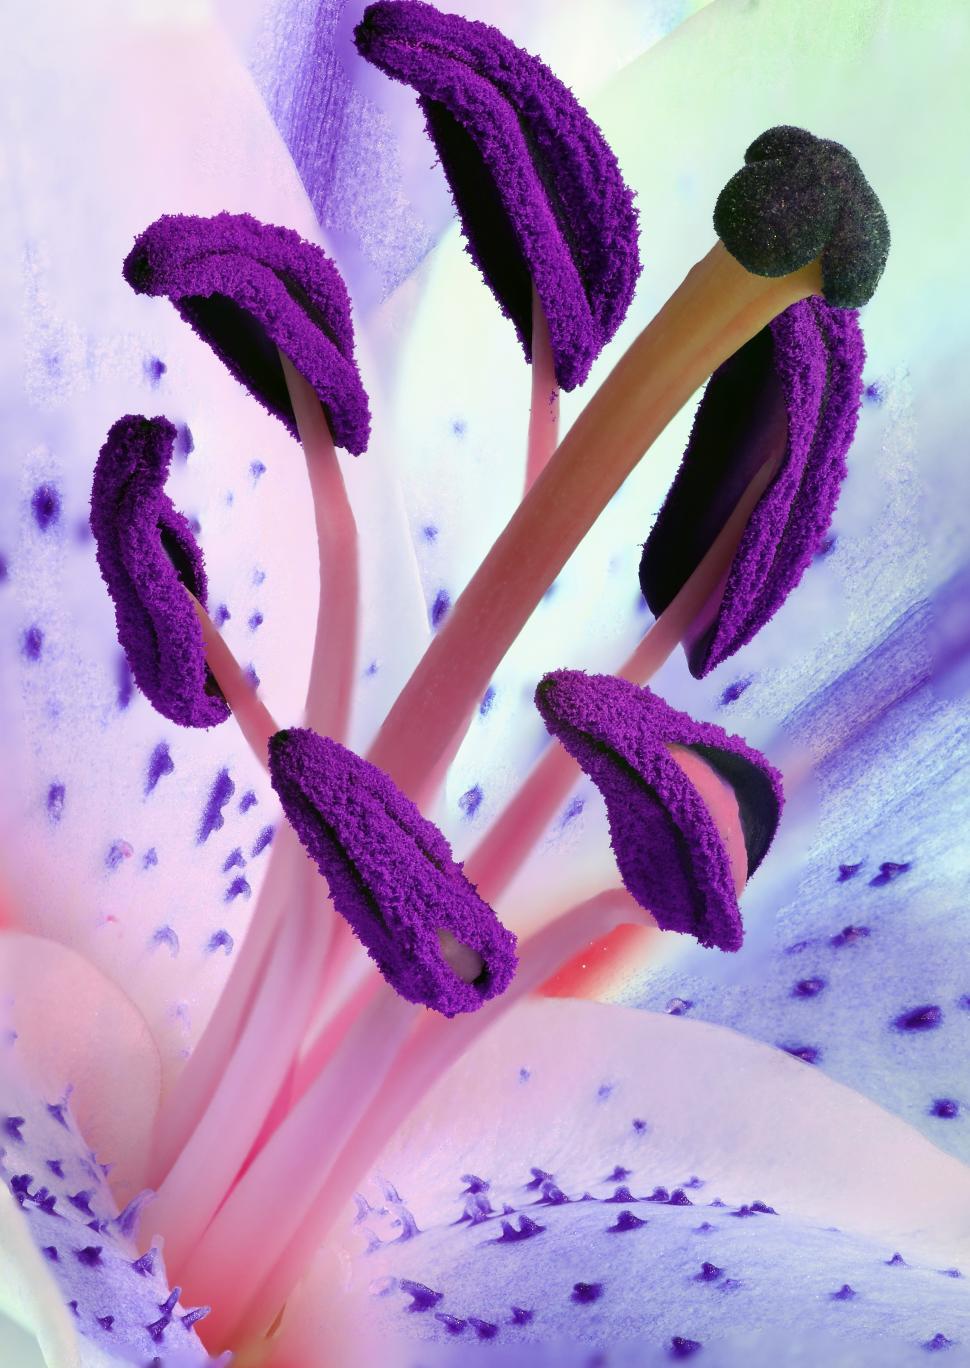 Free Image of Lily Stamens  